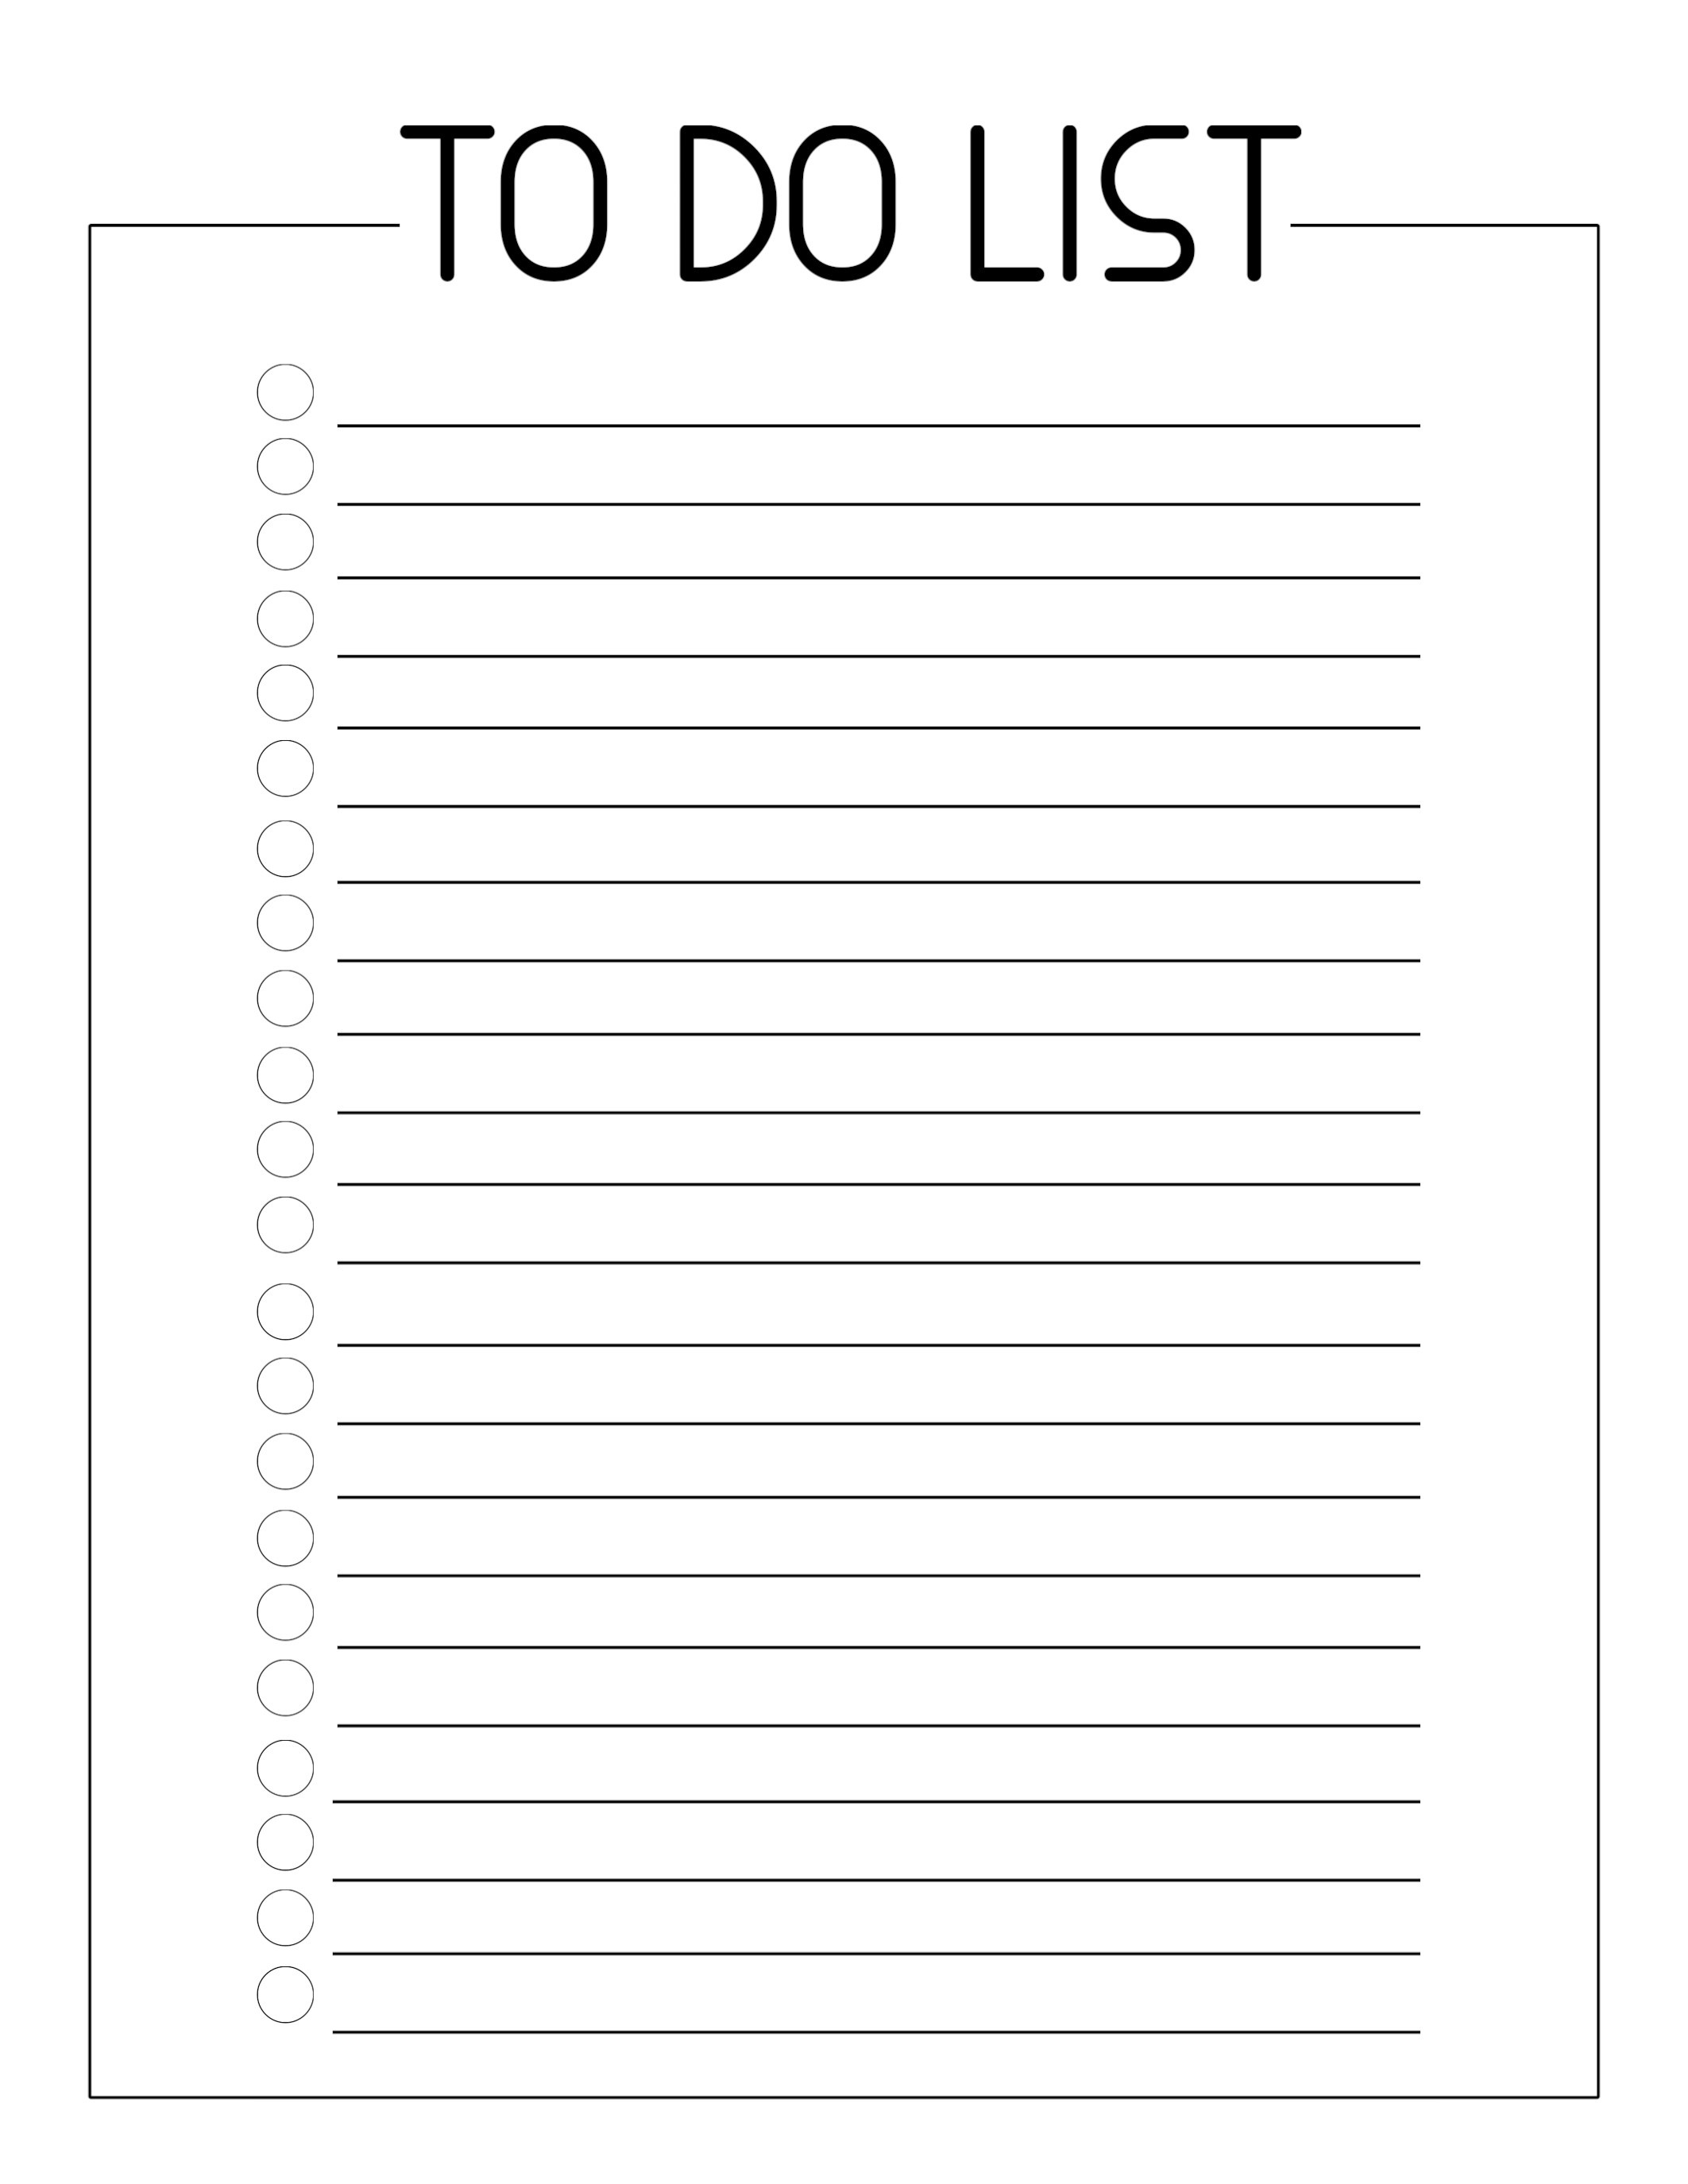 Free Printable To Do Checklist Template - Paper Trail Design - Free Printable List